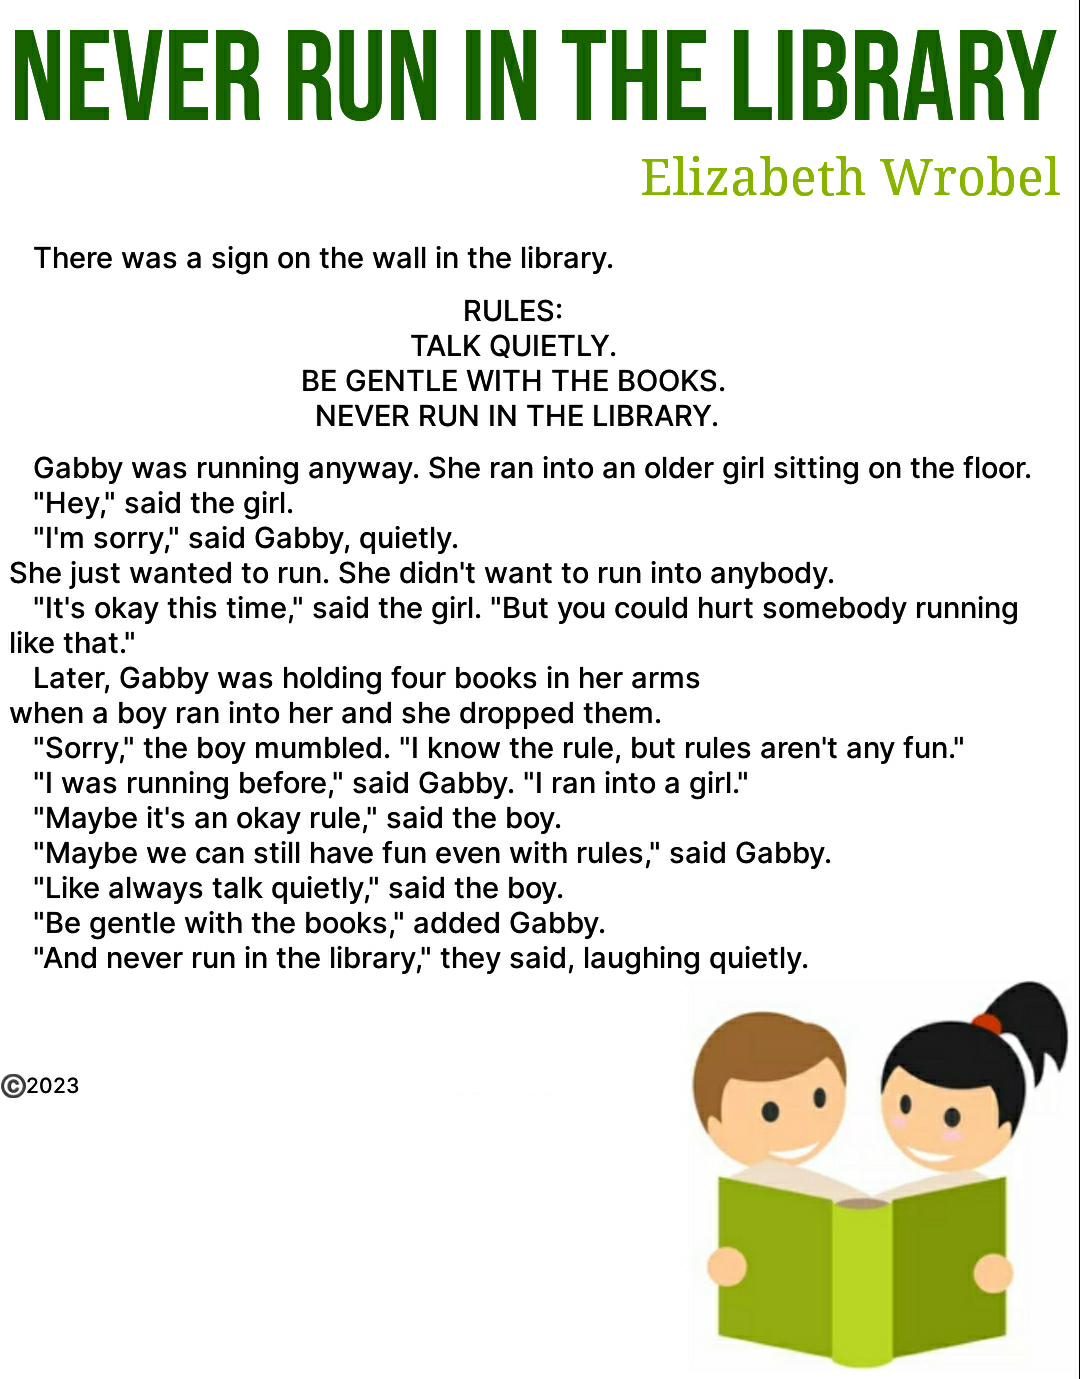 Never Run In The Library a short story by Elizabeth Wrobel